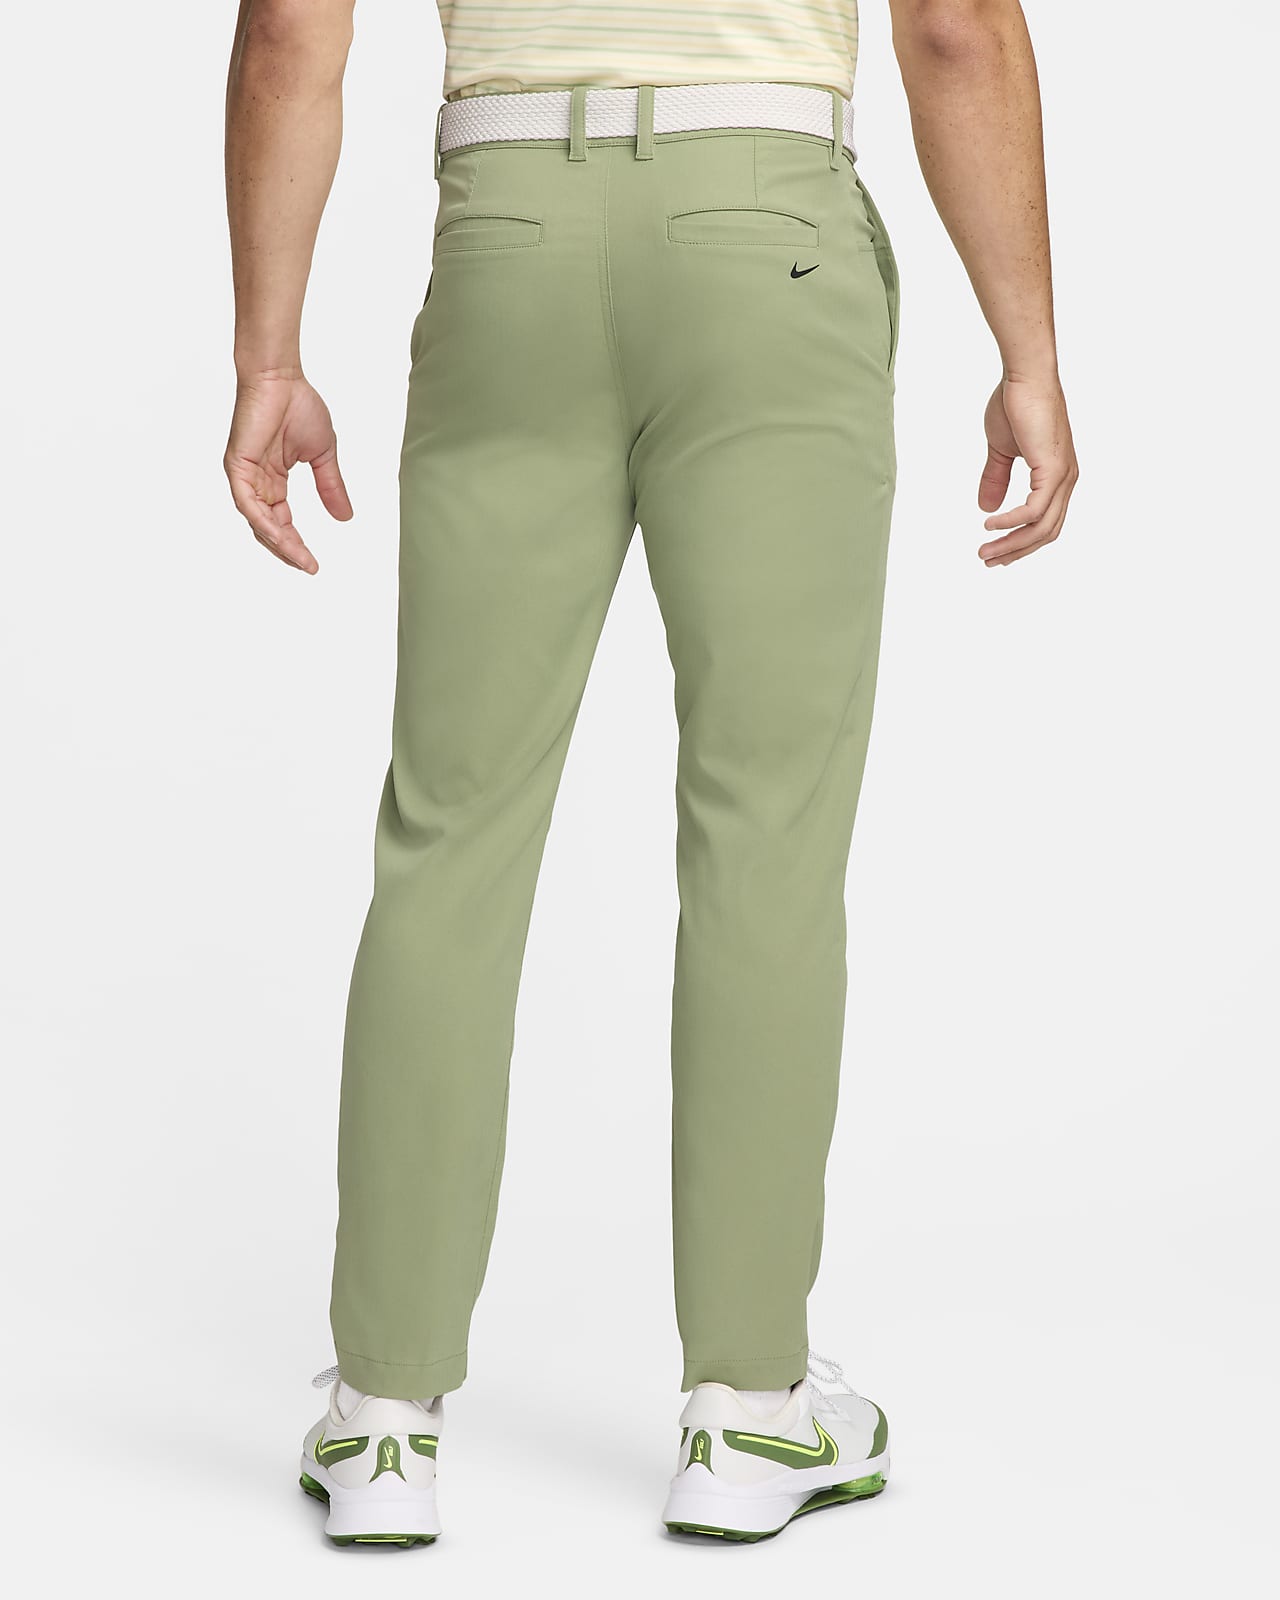 Men's Stretch Golf Pants Slim Fit Quick Dry Pants - Army Green / S